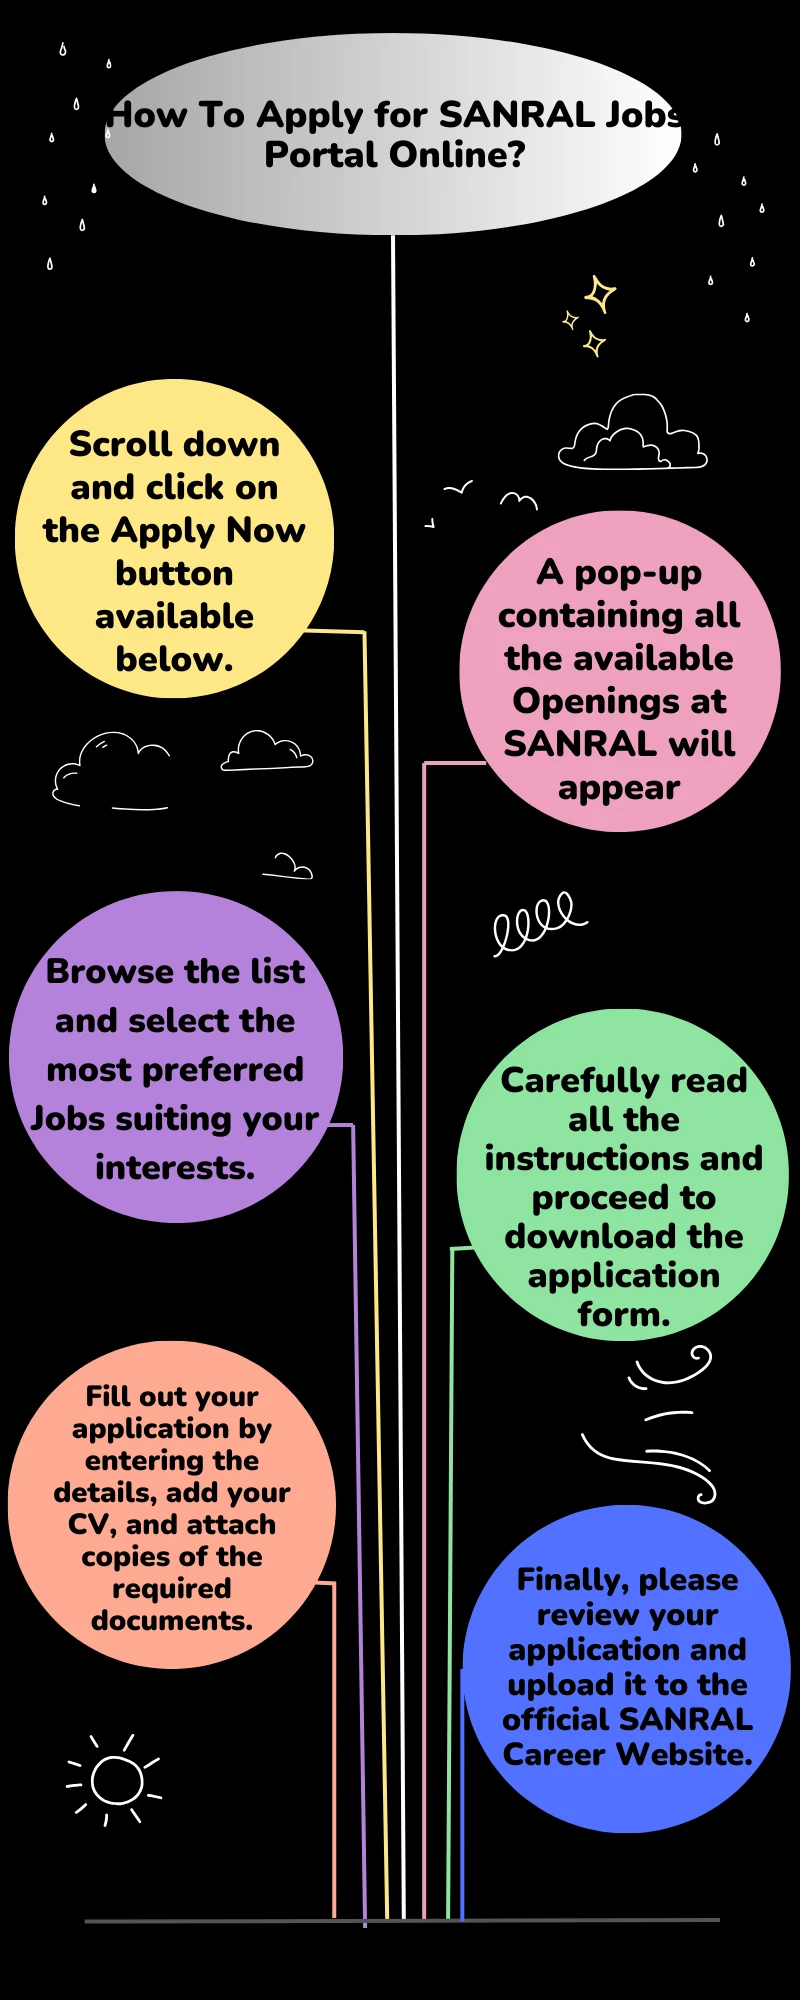 How To Apply for SANRAL Jobs Portal Online?